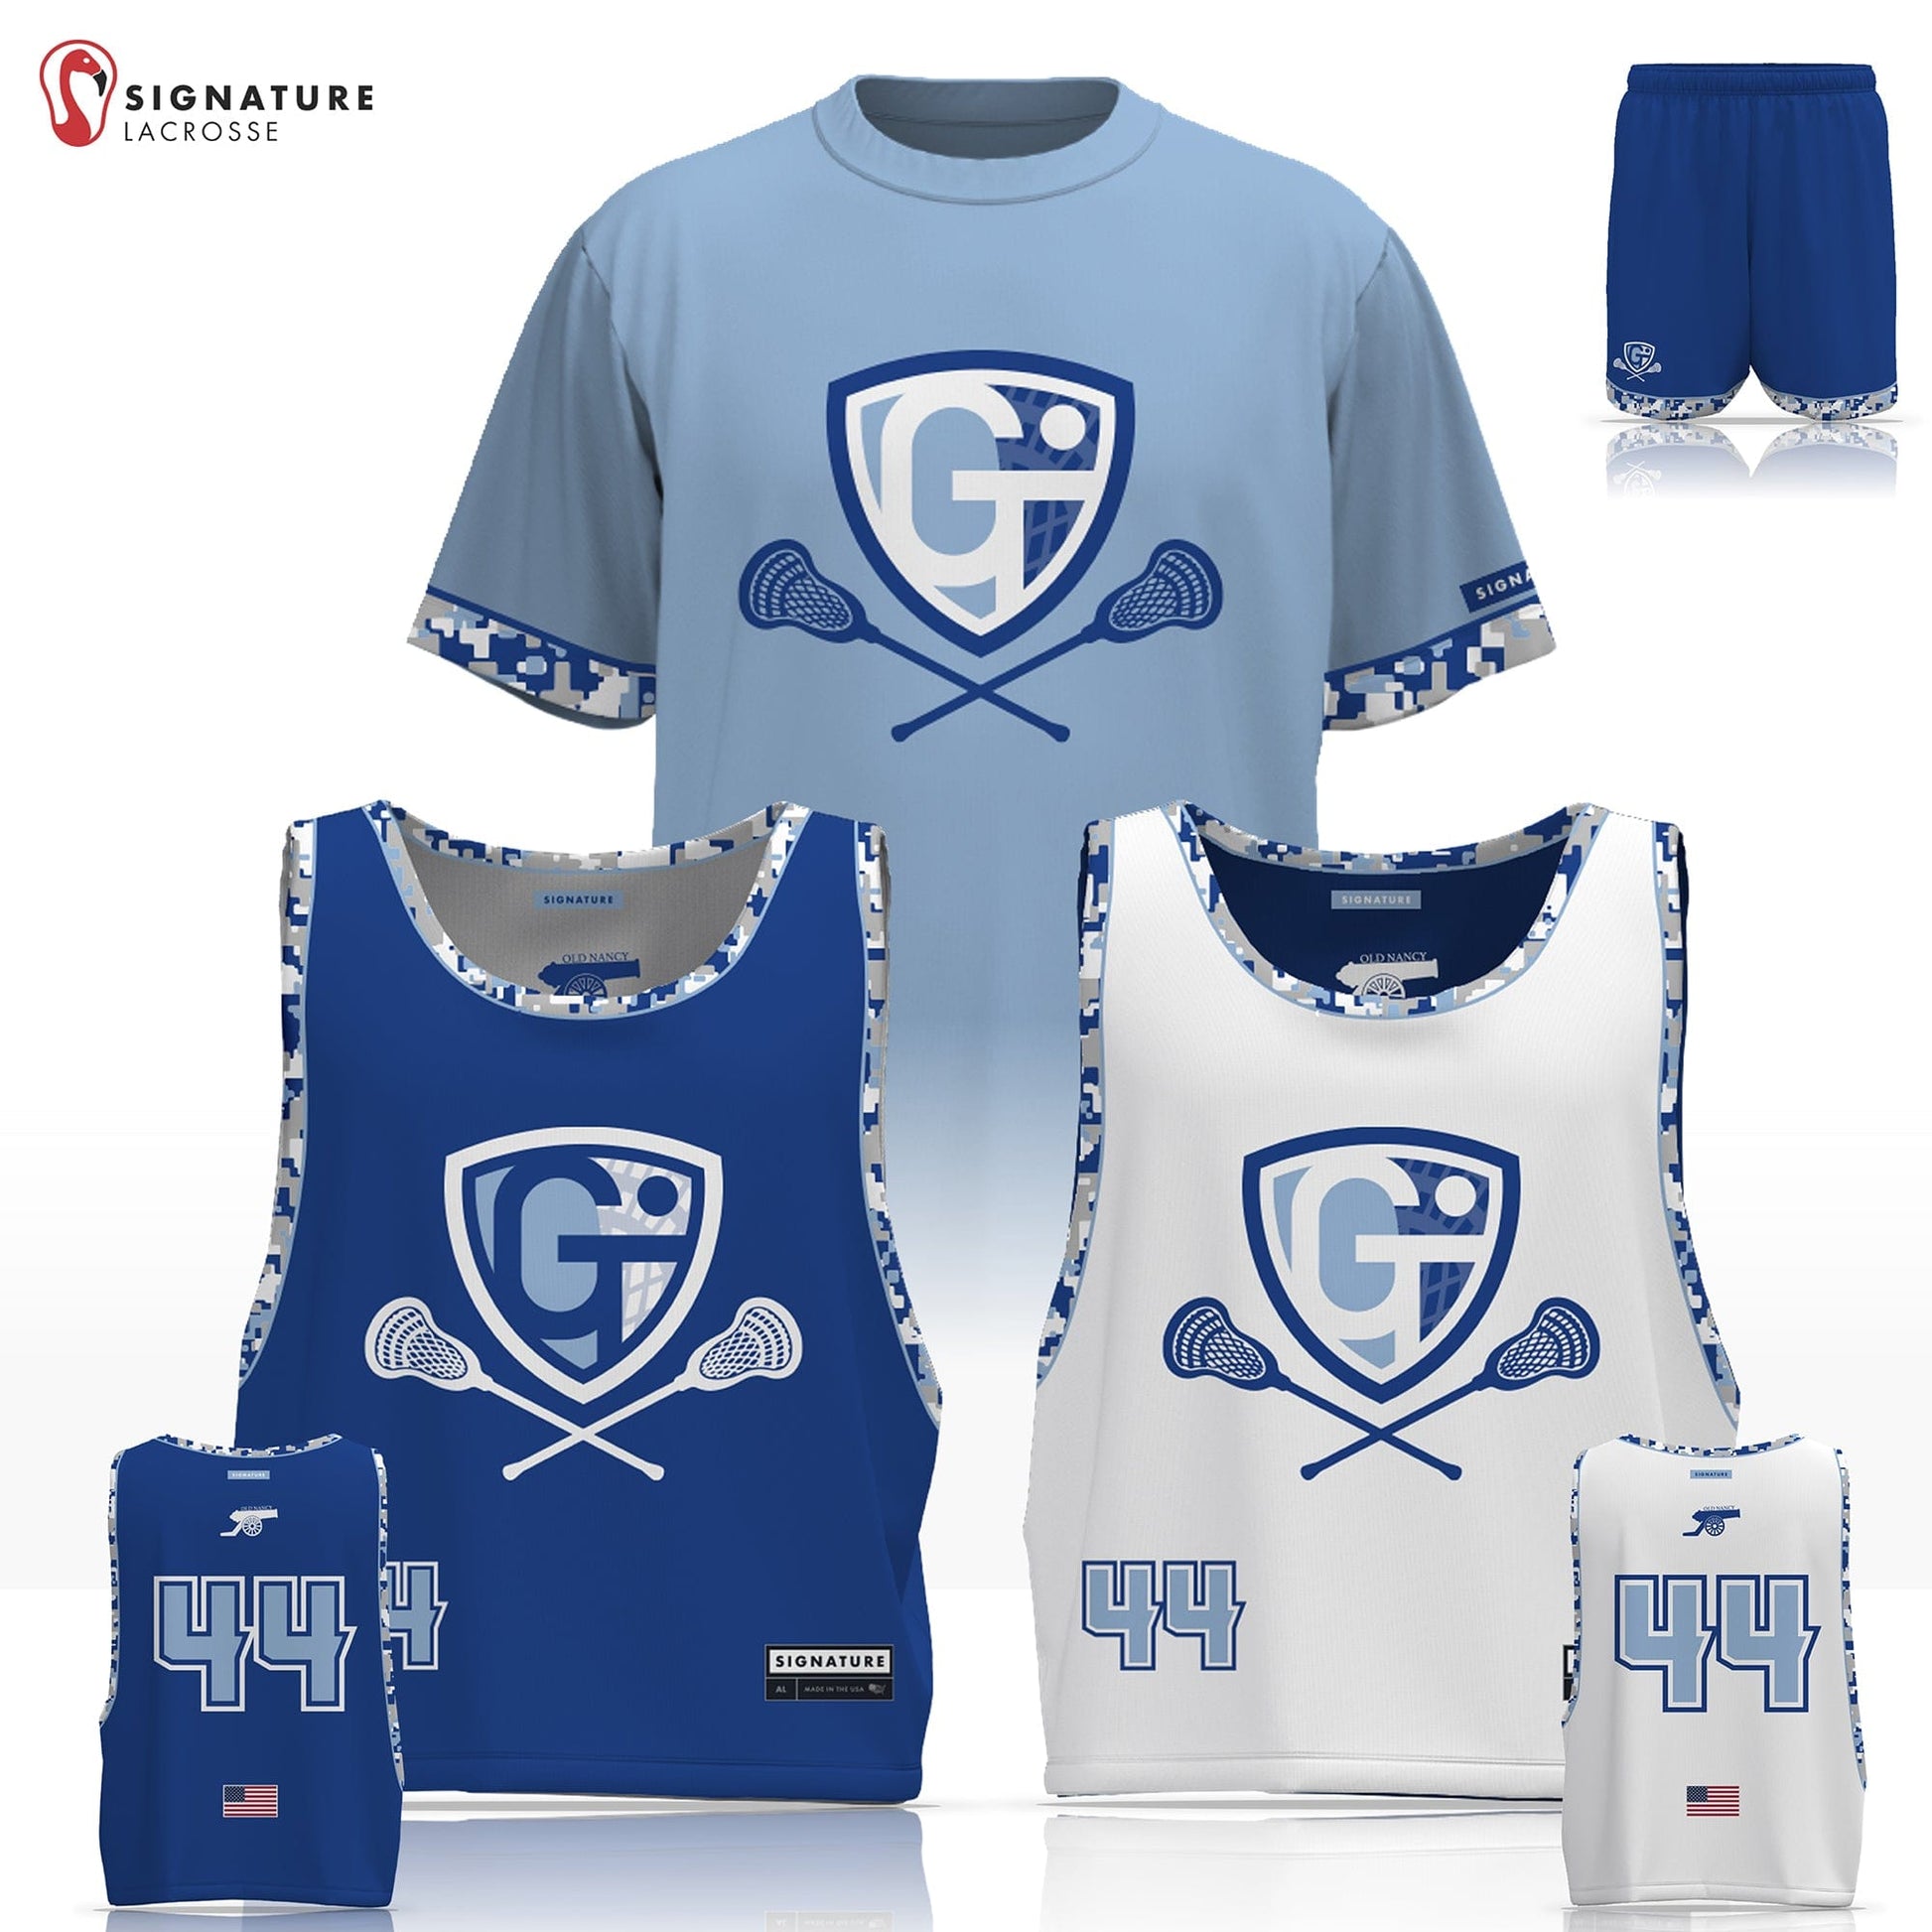 Georgetown-Triton Youth Lacrosse Men's 3 Piece Player Game Package: 1-2 Signature Lacrosse